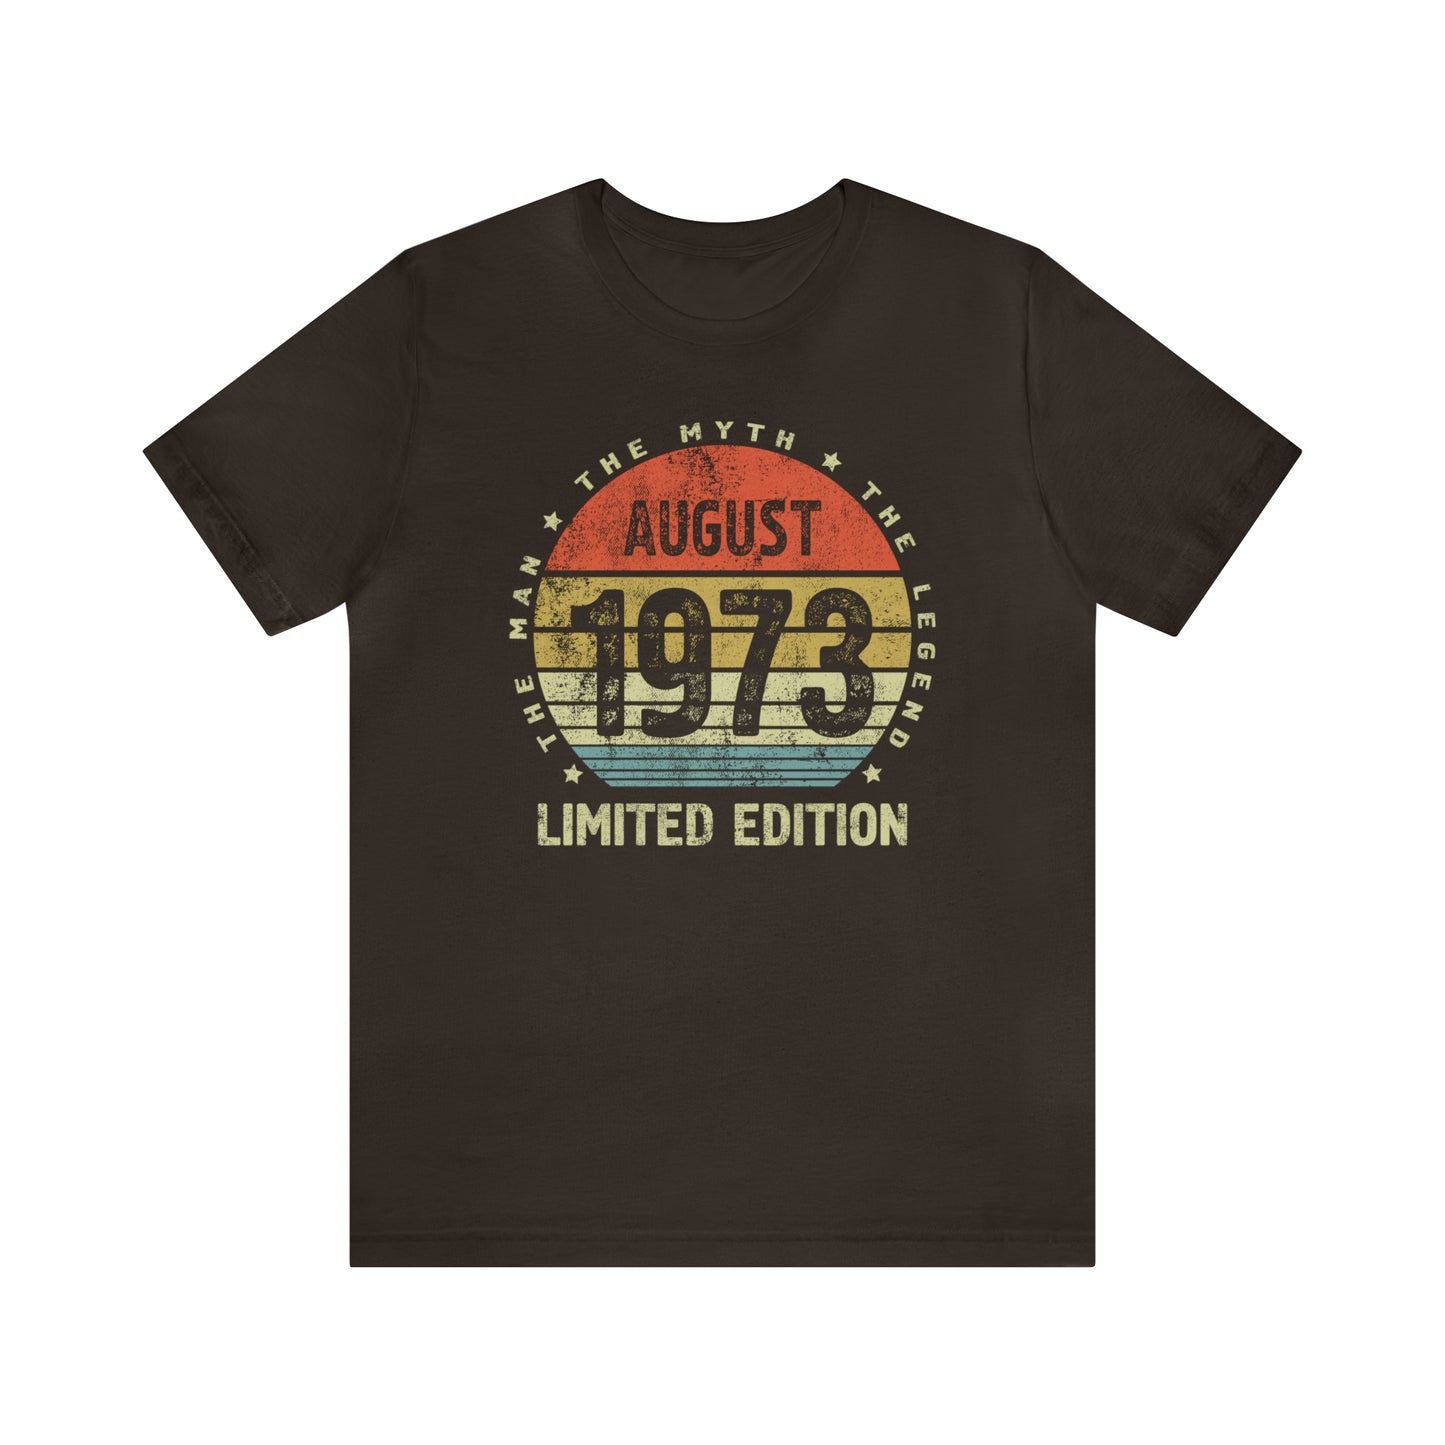 August 1973 birthday shirt for men or husband, Gift shirt for father or brother